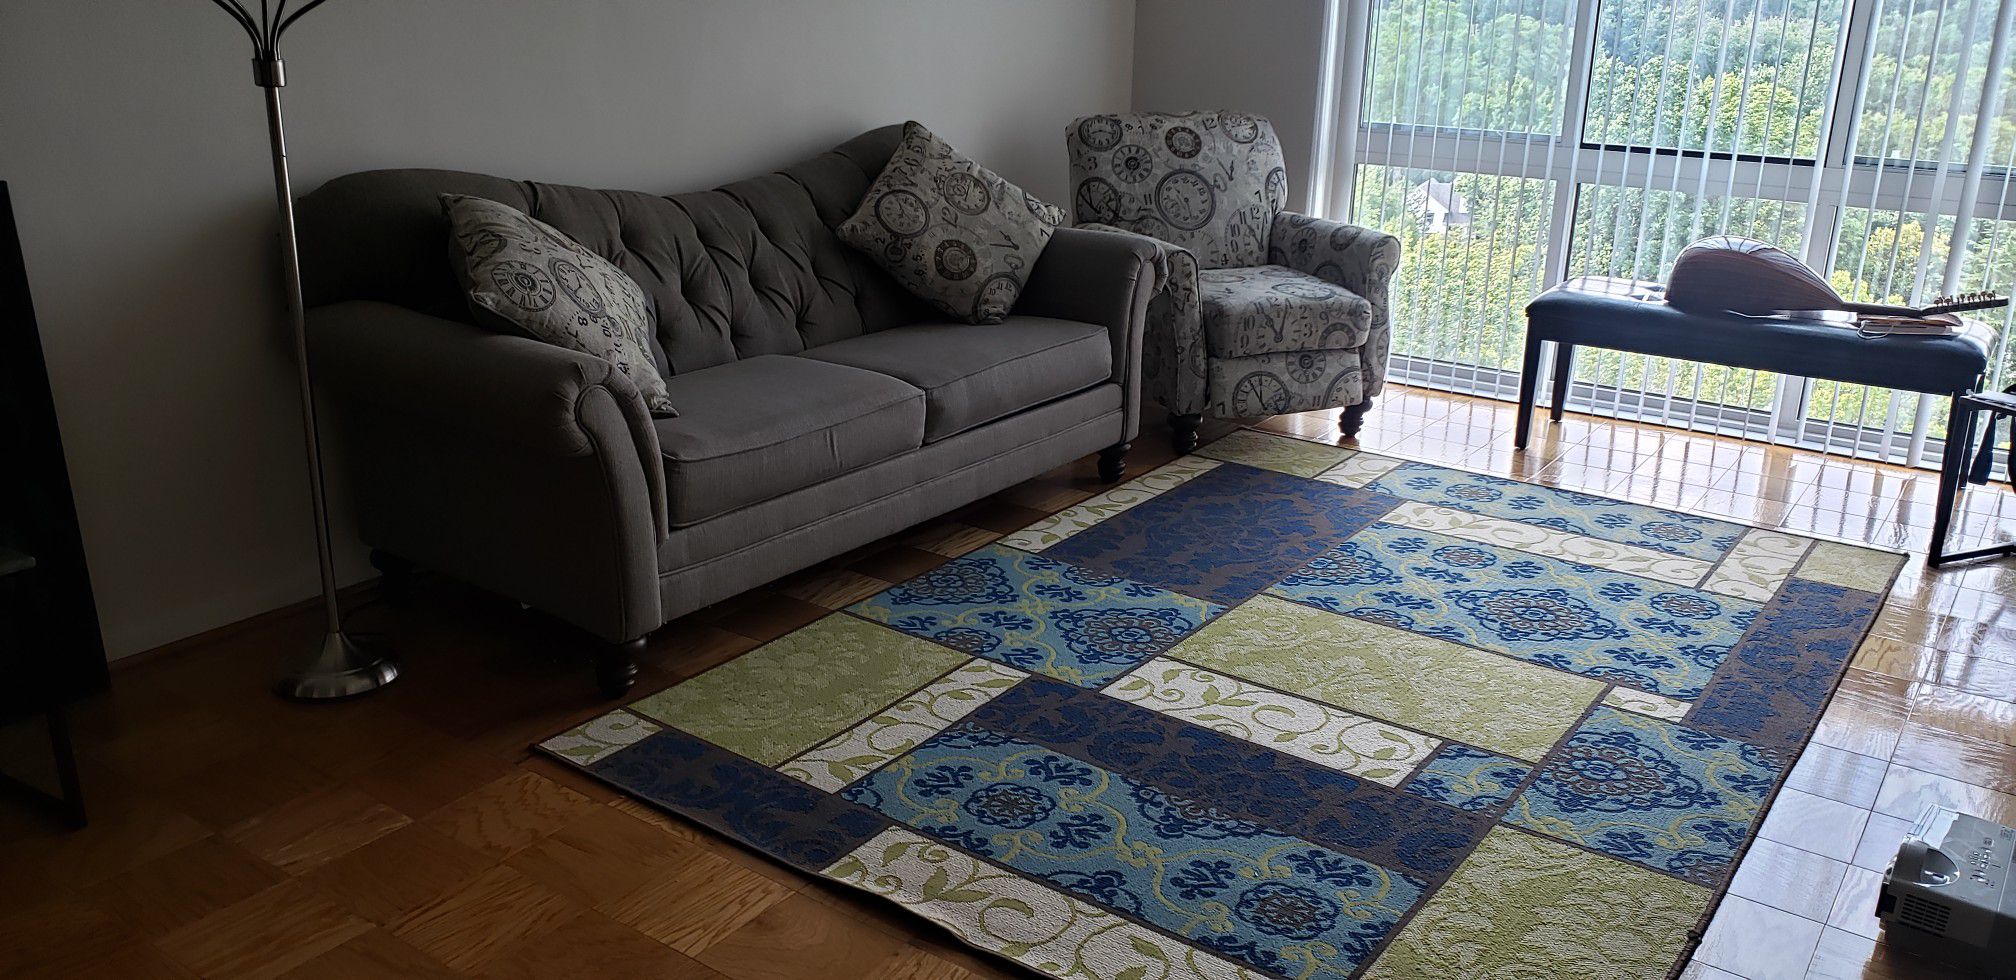 living room set. sofa bed ,reclining chair and carpet set